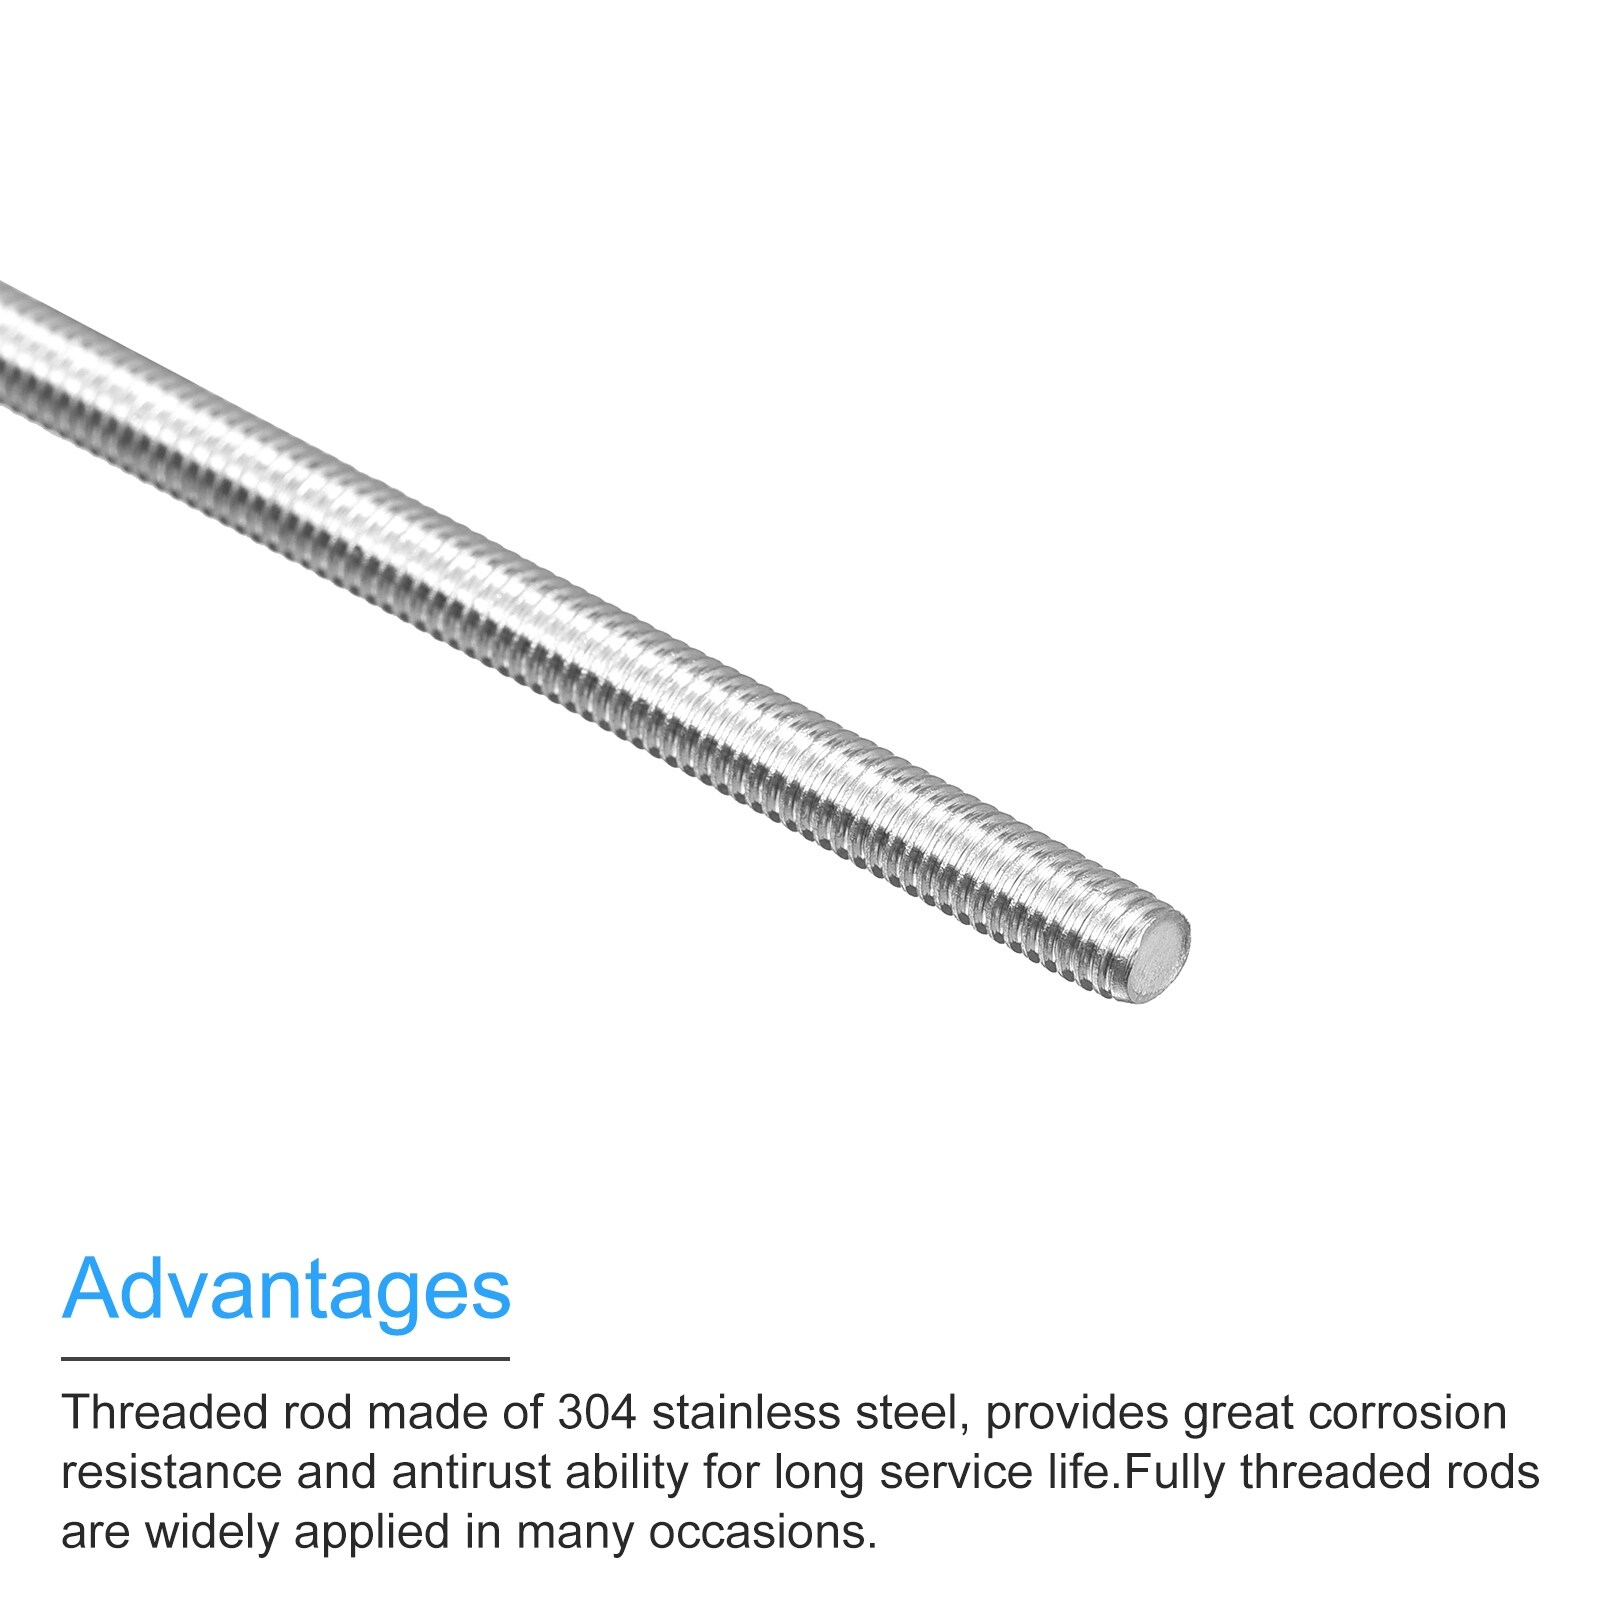 Fully Threaded Rod M4x500mm 0.7mm Pitch 304 Stainless Steel Right Hand 4Pcs - Silver Tone